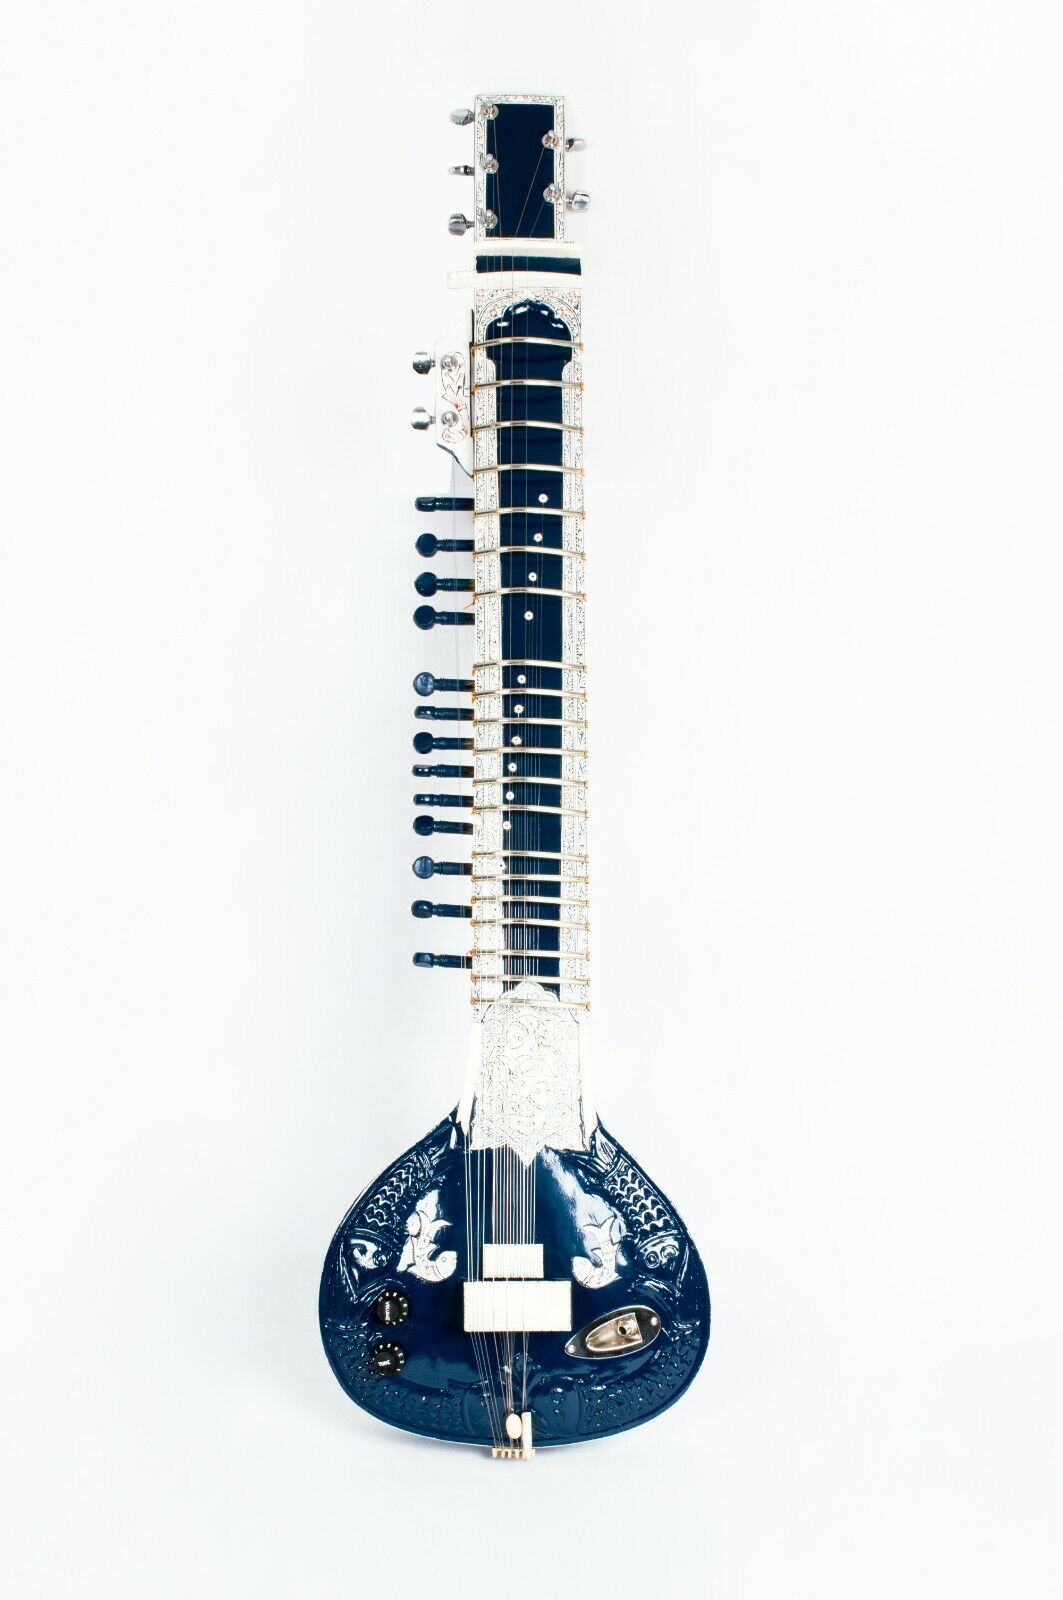 Professional High Quality Indian Musical String Instrument Electric Travel Sitar